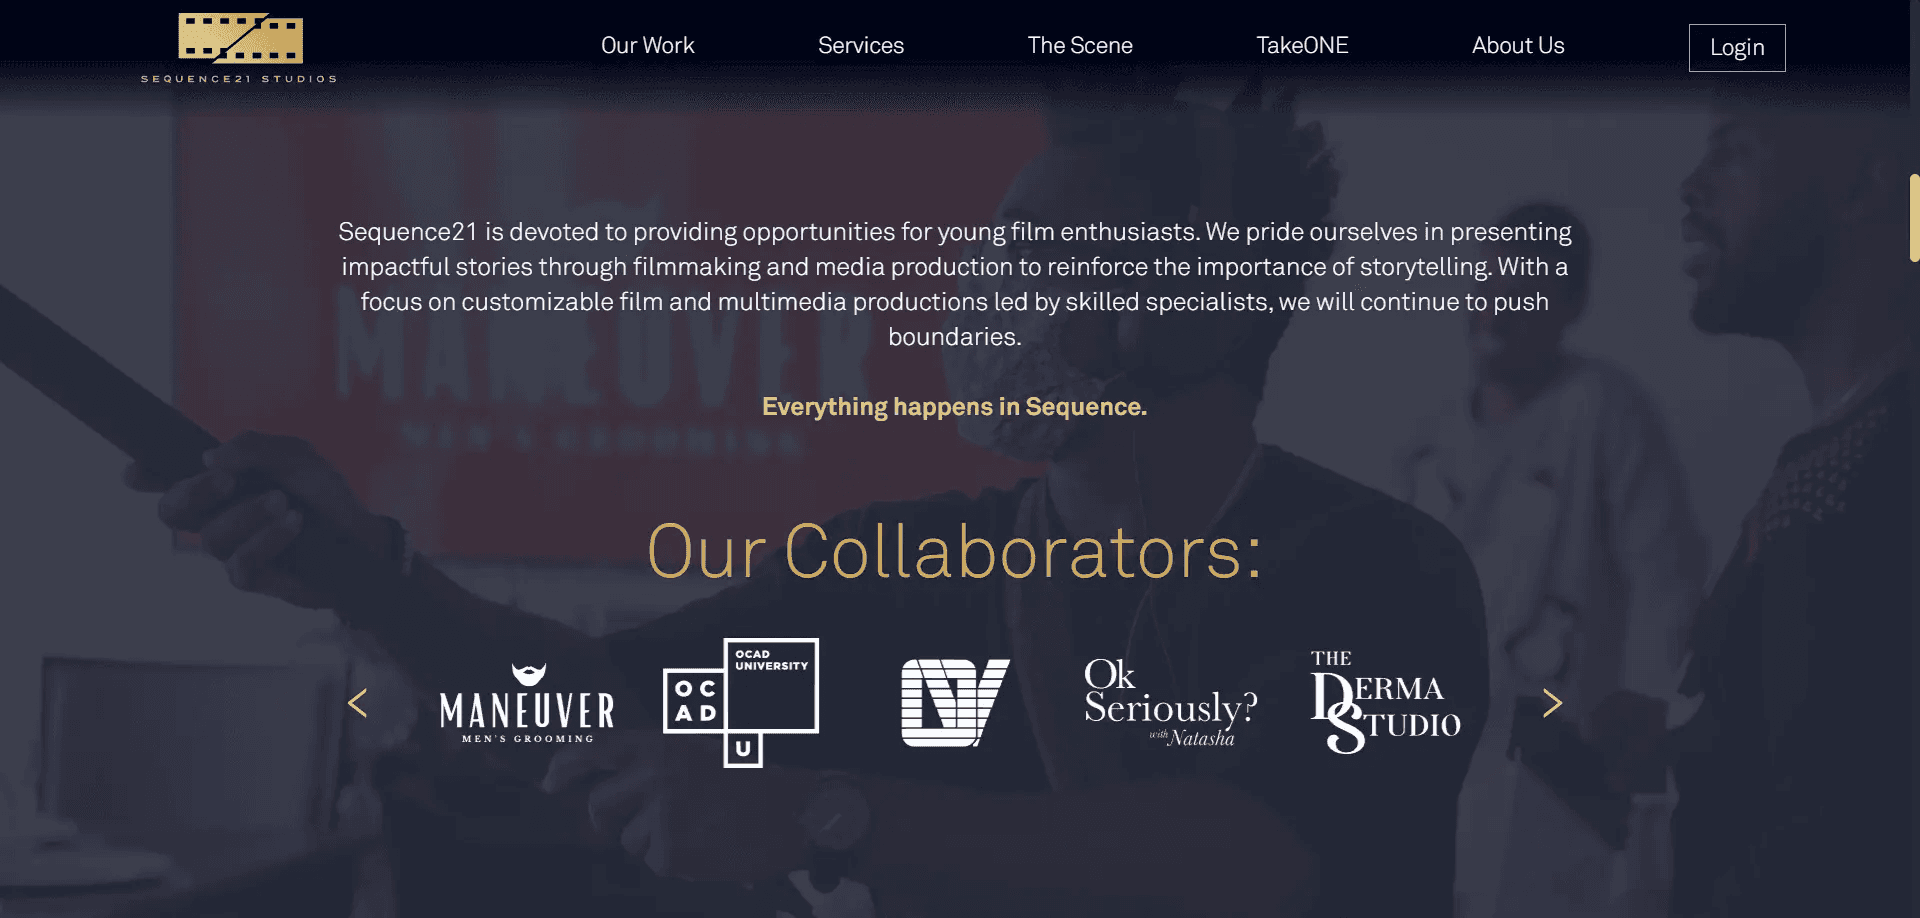 Under the text 'Our Collaborators', a number of logos are displayed